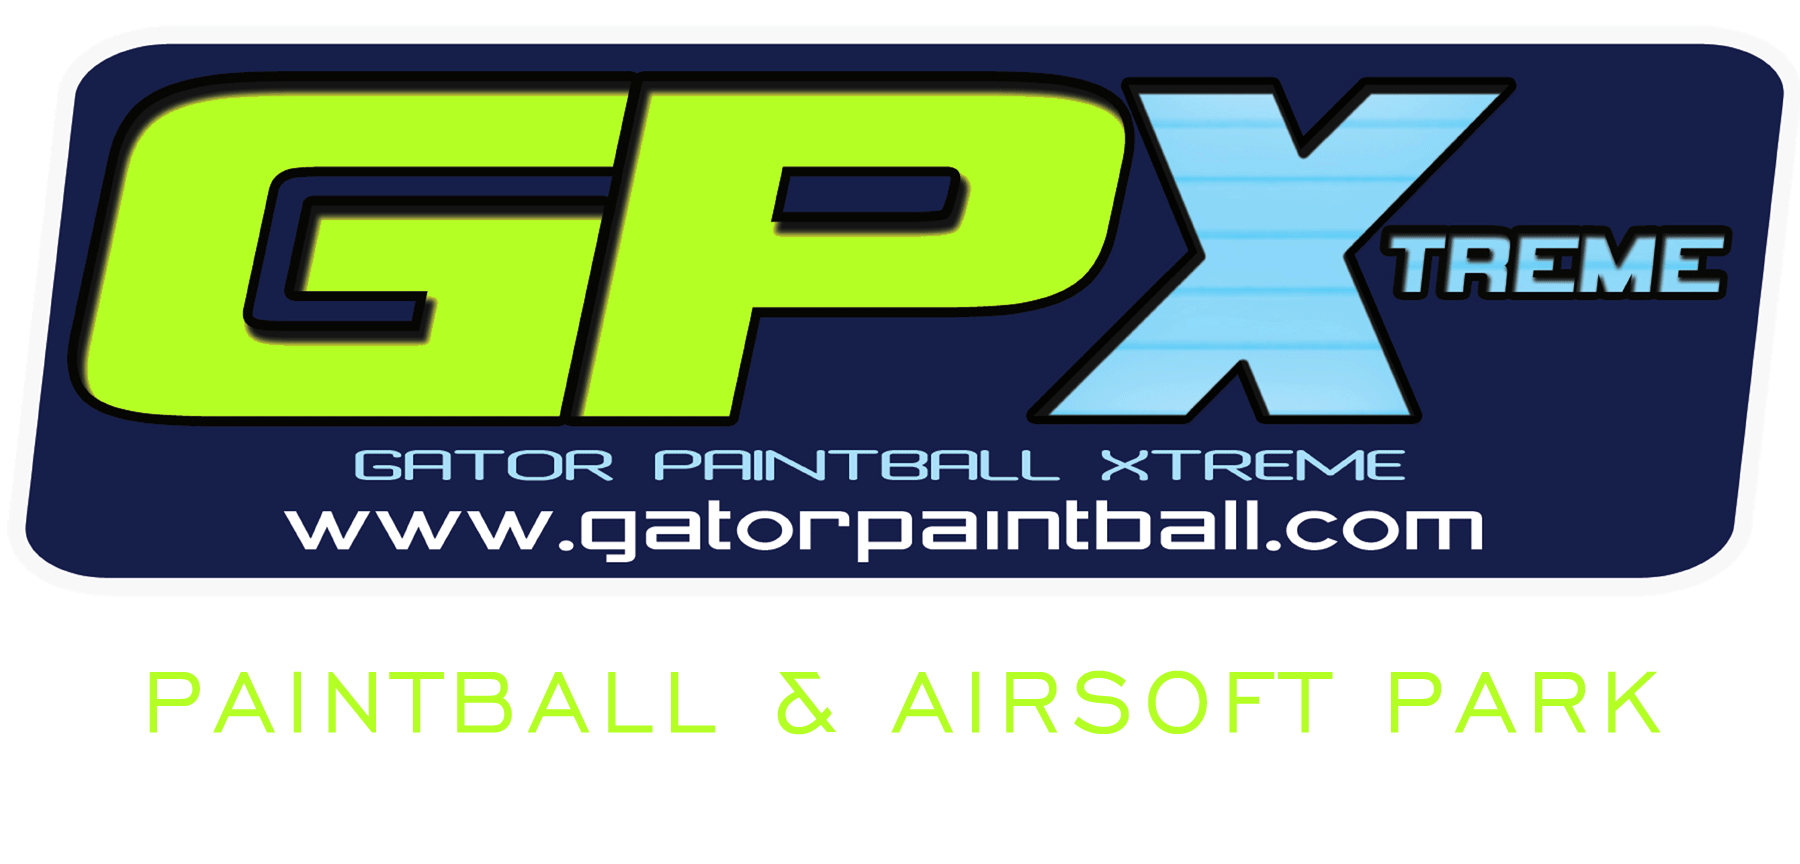 Gold and Green Gator Logo - HOME PAGE - Gator Paintball Extreme